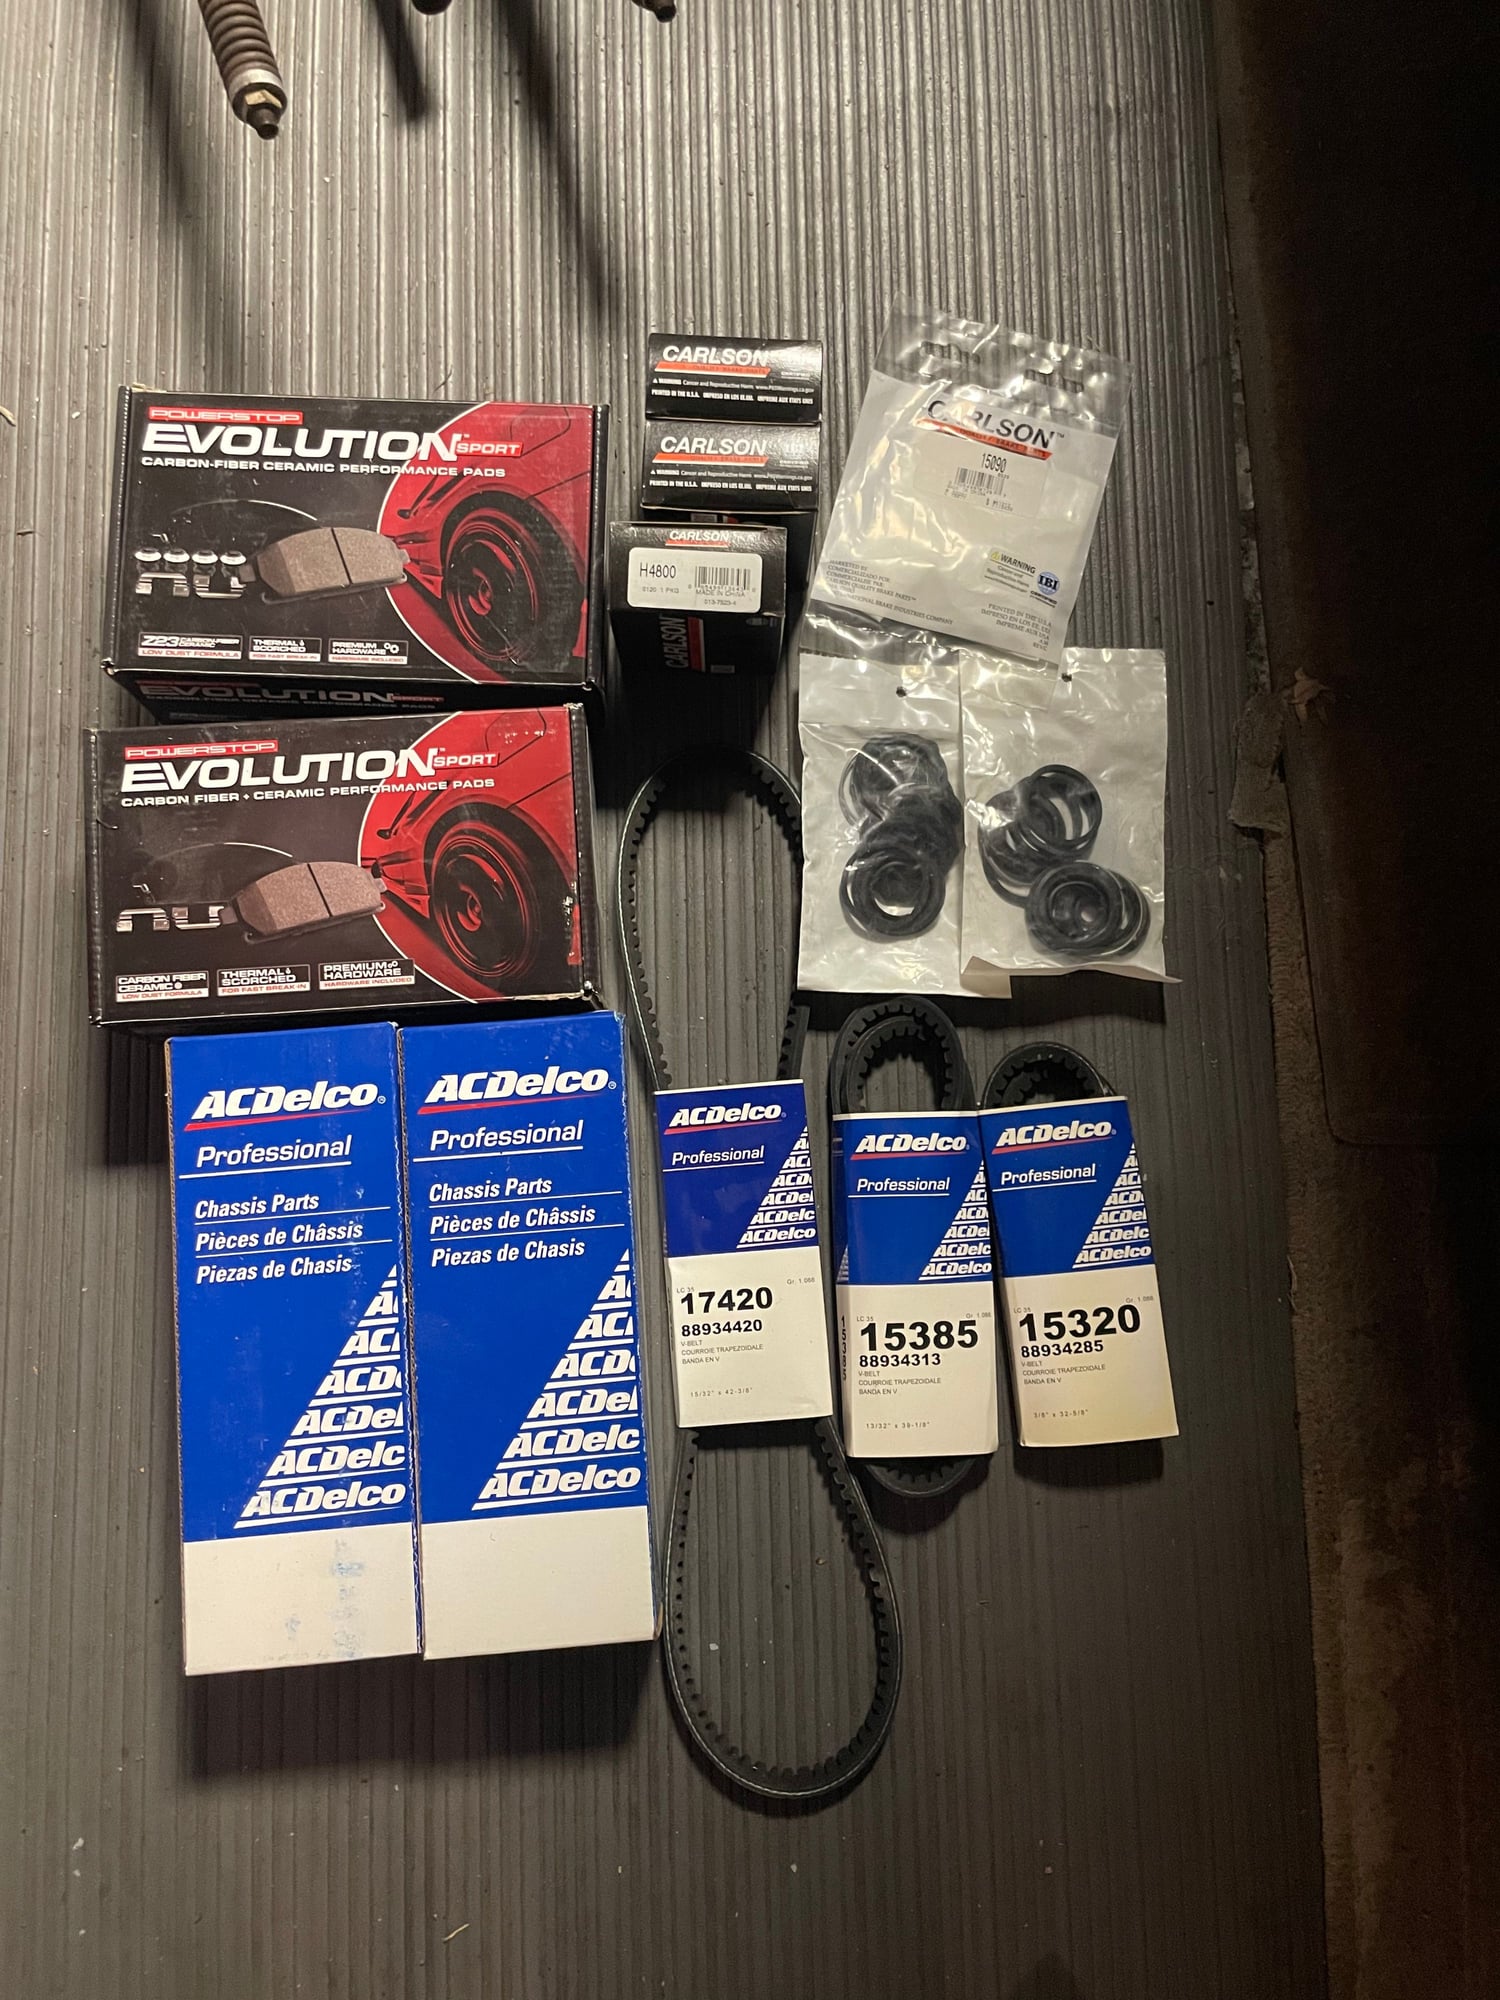 Miscellaneous - FC suspension bushing NEW. Turbo manifolds and throttle bodies. Racing beat strut - New - 0  All Models - Lincoln, NE 68506, United States